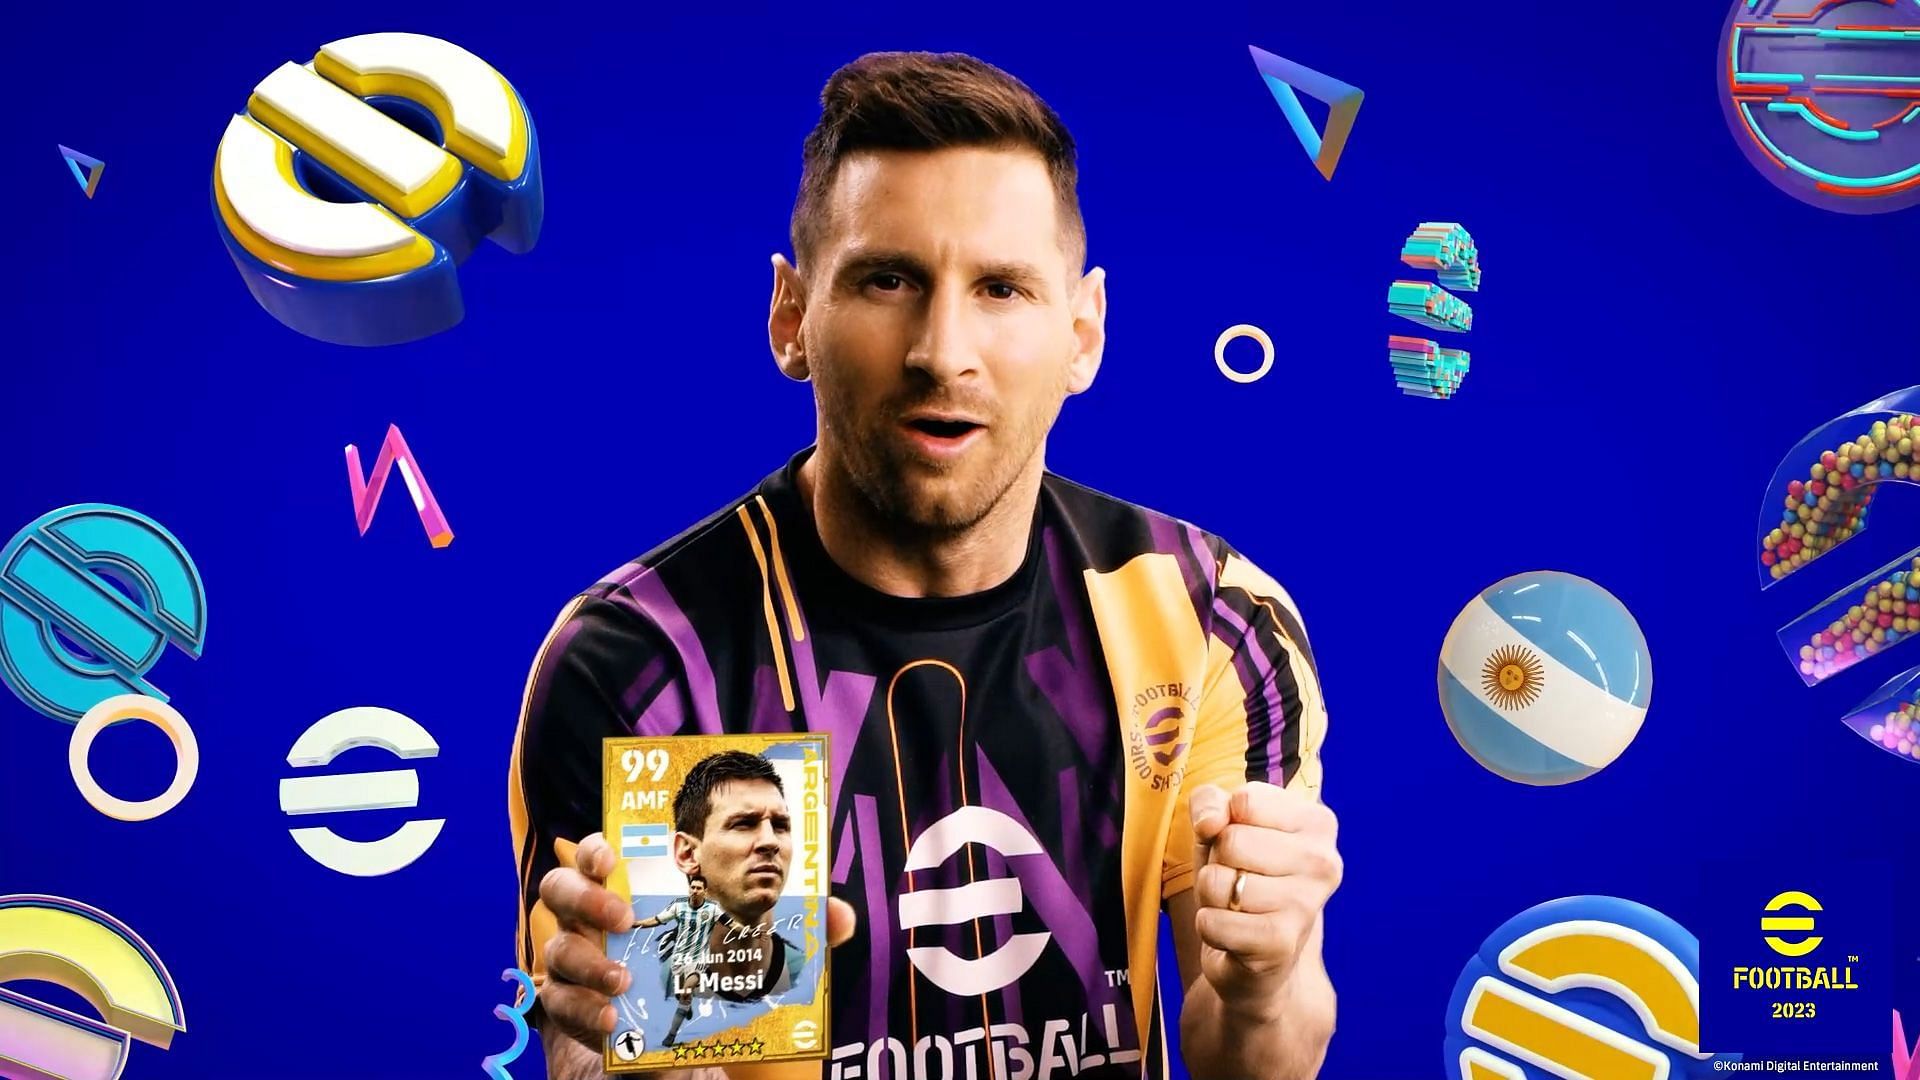 eFootball™ 2023 v2.0.0 Patch Notes